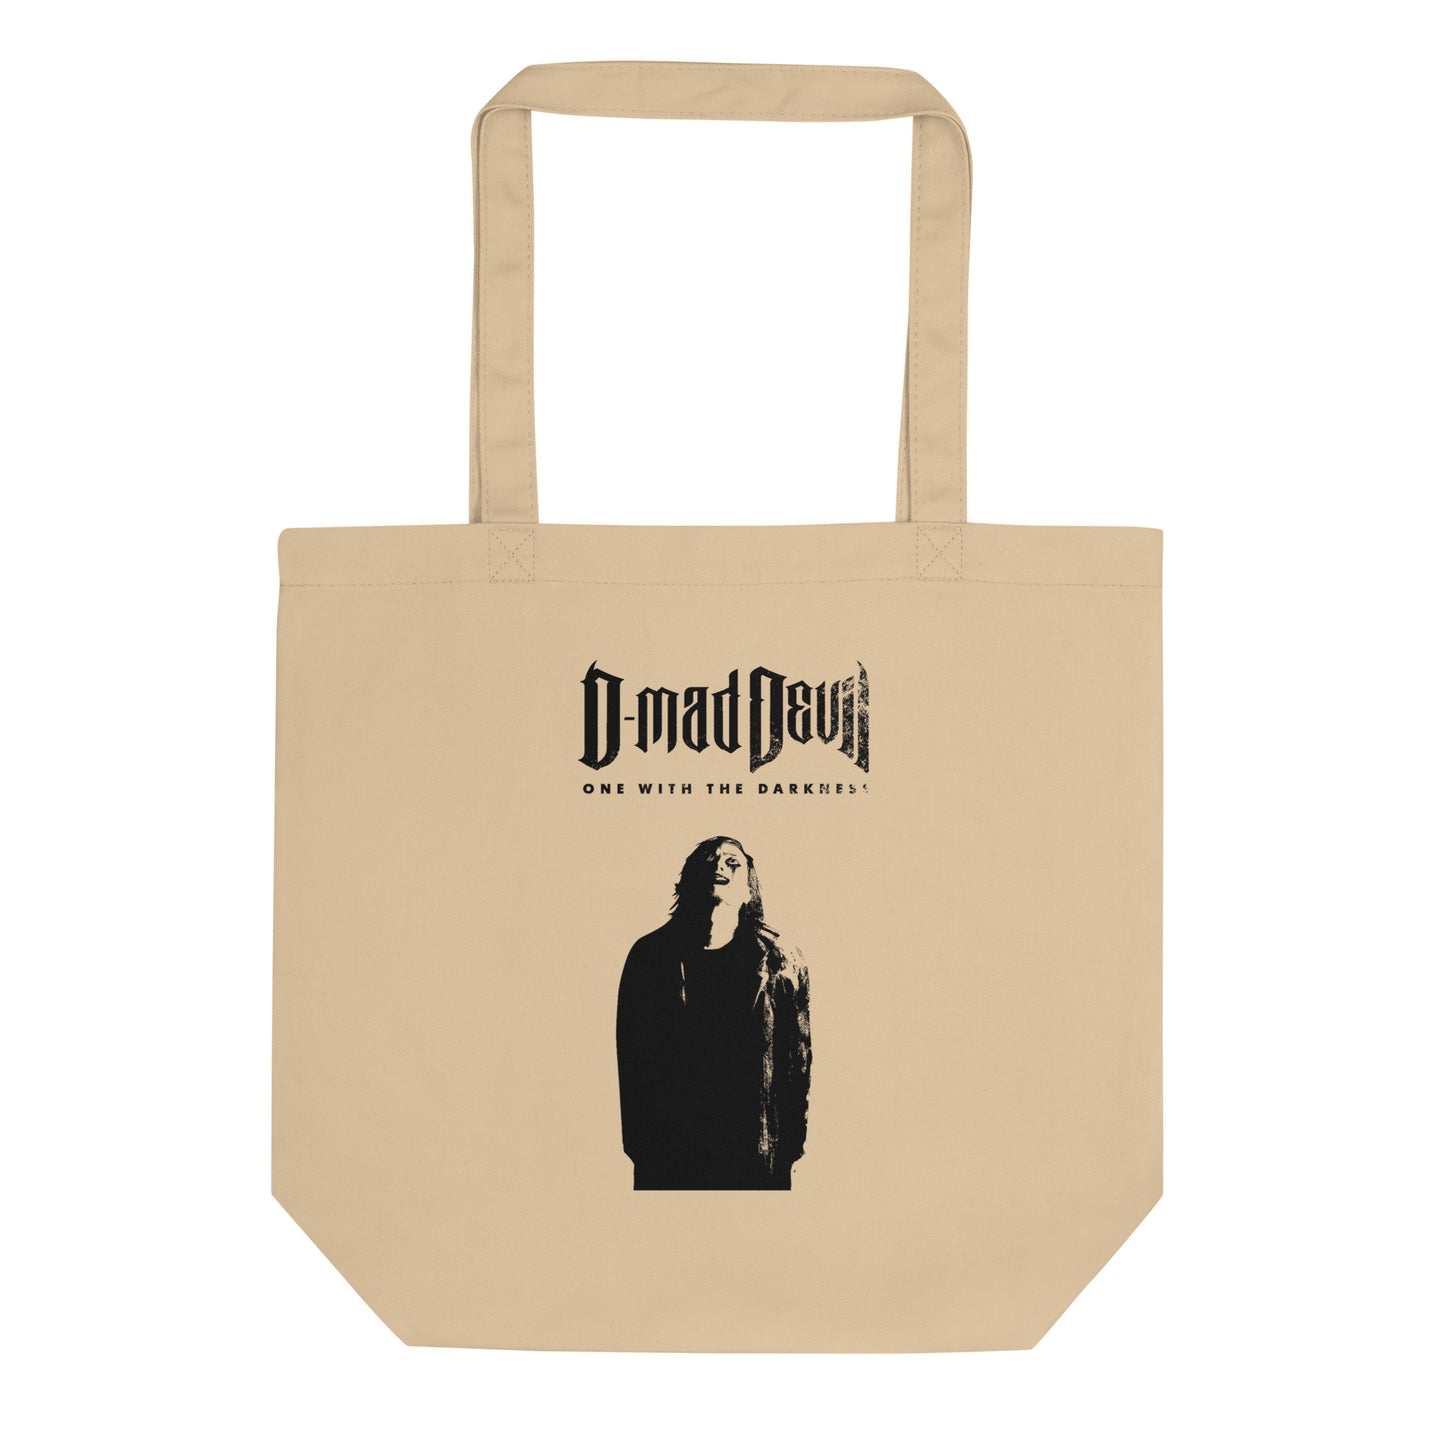 One With the Darkness Eco Tote Bag (Oyster)